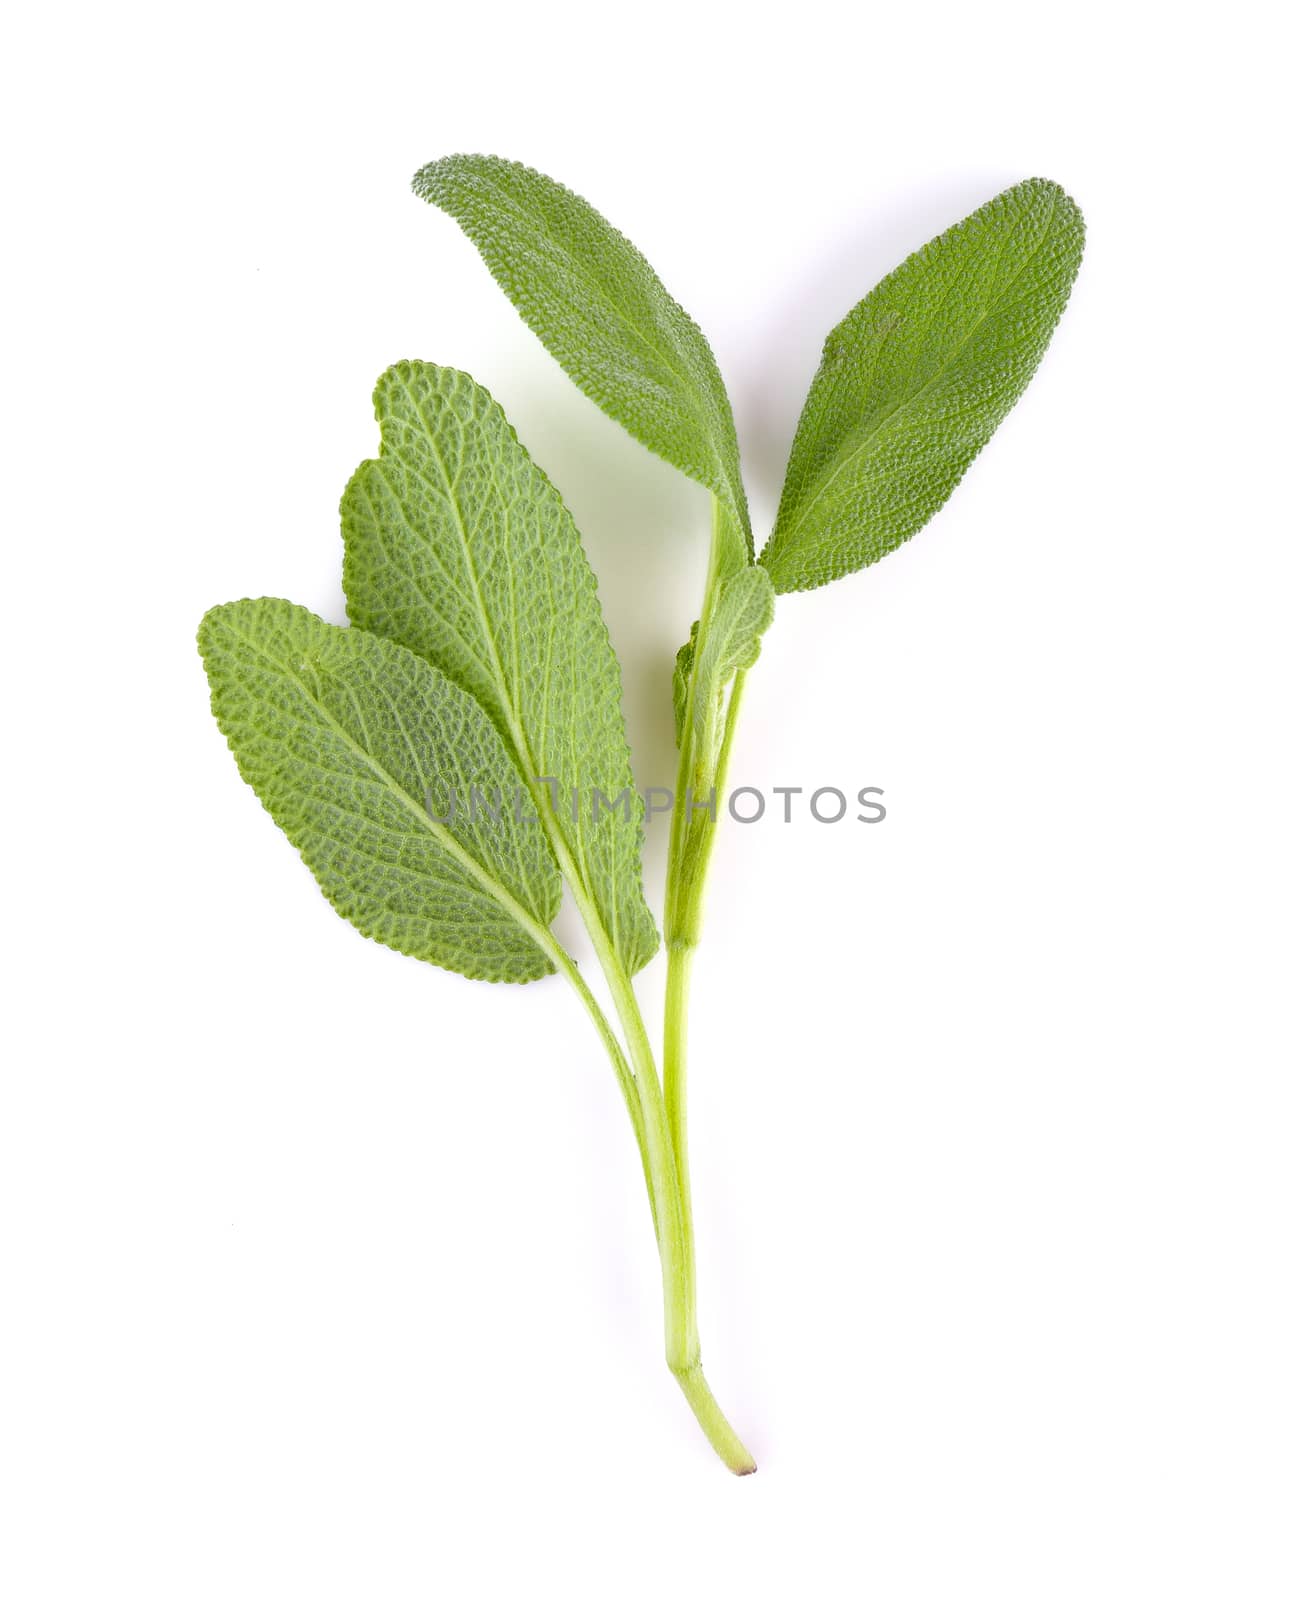 Sage plant on a white background by sommai